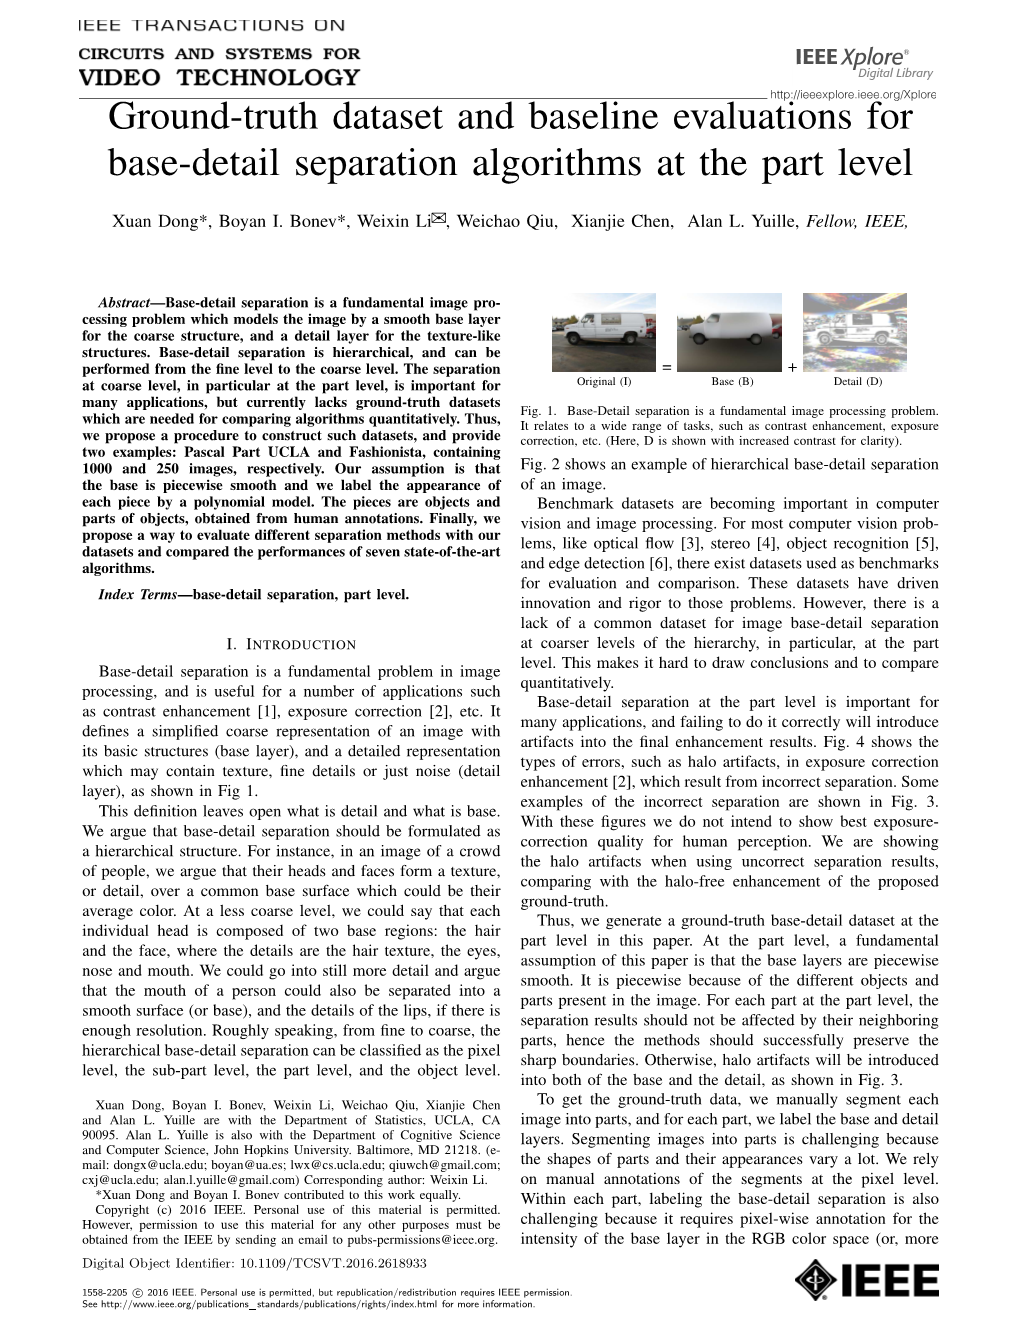 Ground-Truth Dataset and Baseline Evaluations for Base-Detail Separation Algorithms at the Part Level